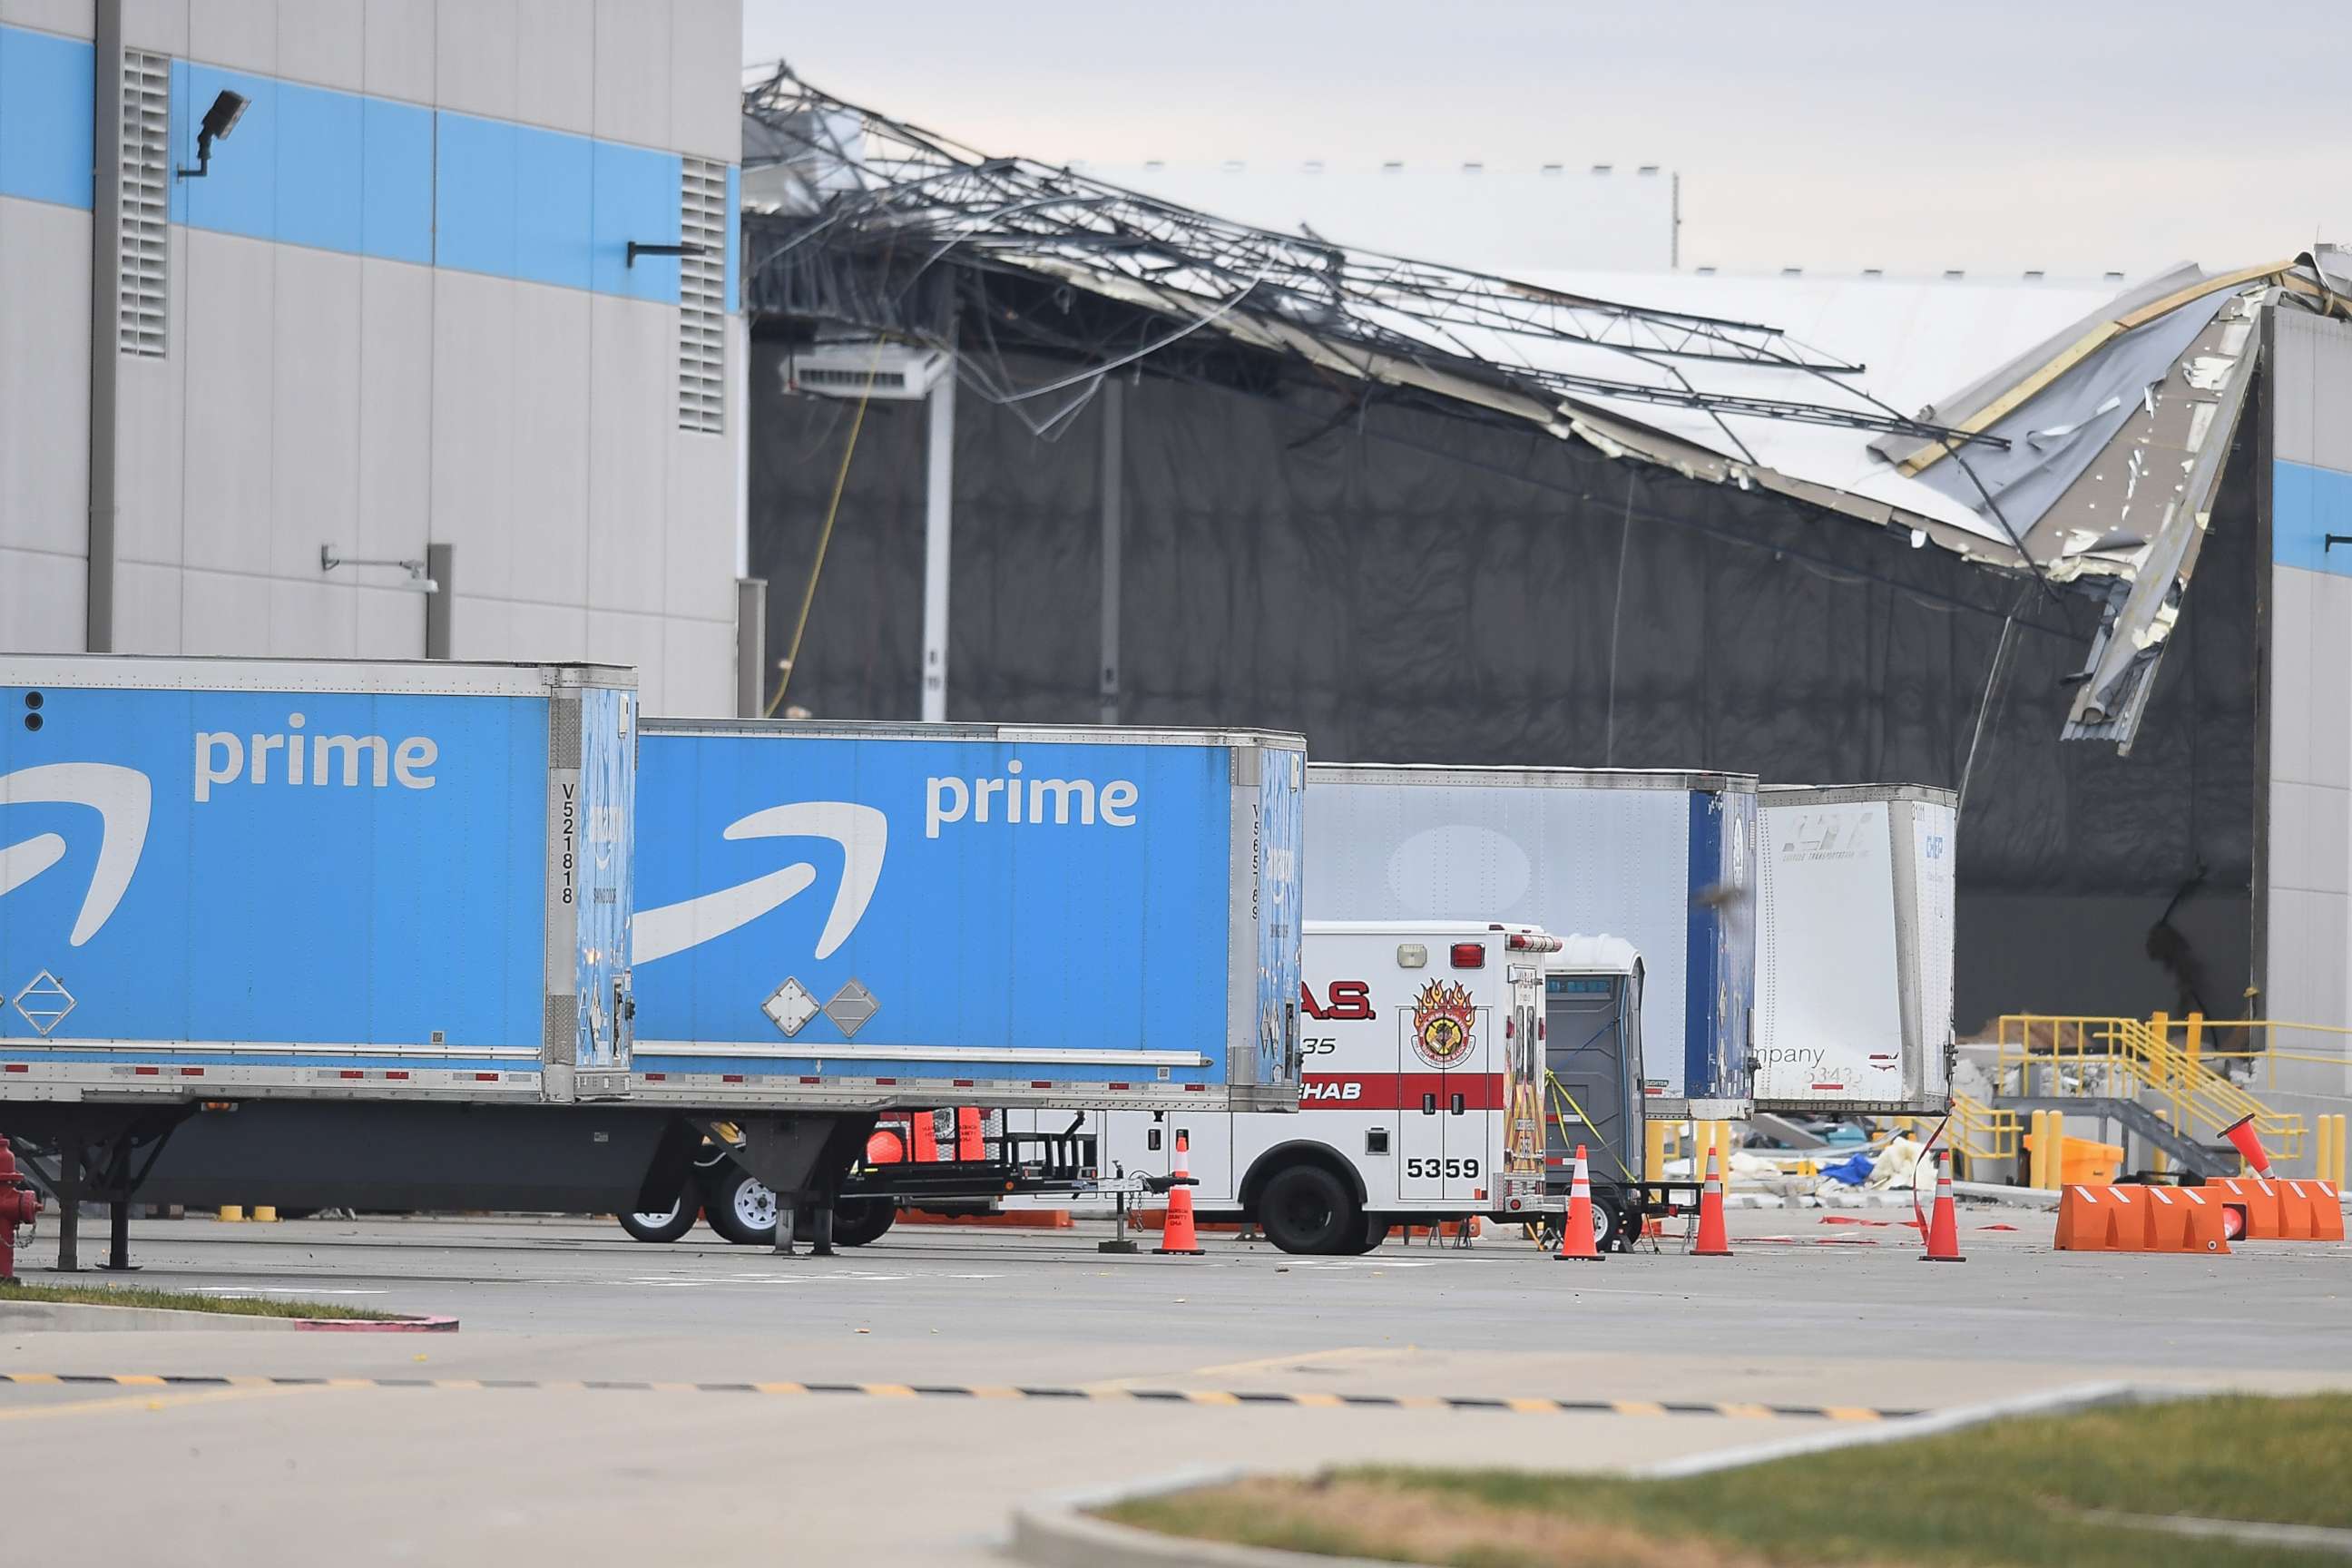 PHOTO: Amazon truck cabs are seen outside a damaged Amazon Distribution Center after it was hit by a tornado, Dec. 11, 2021, in Edwardsville, Ill.